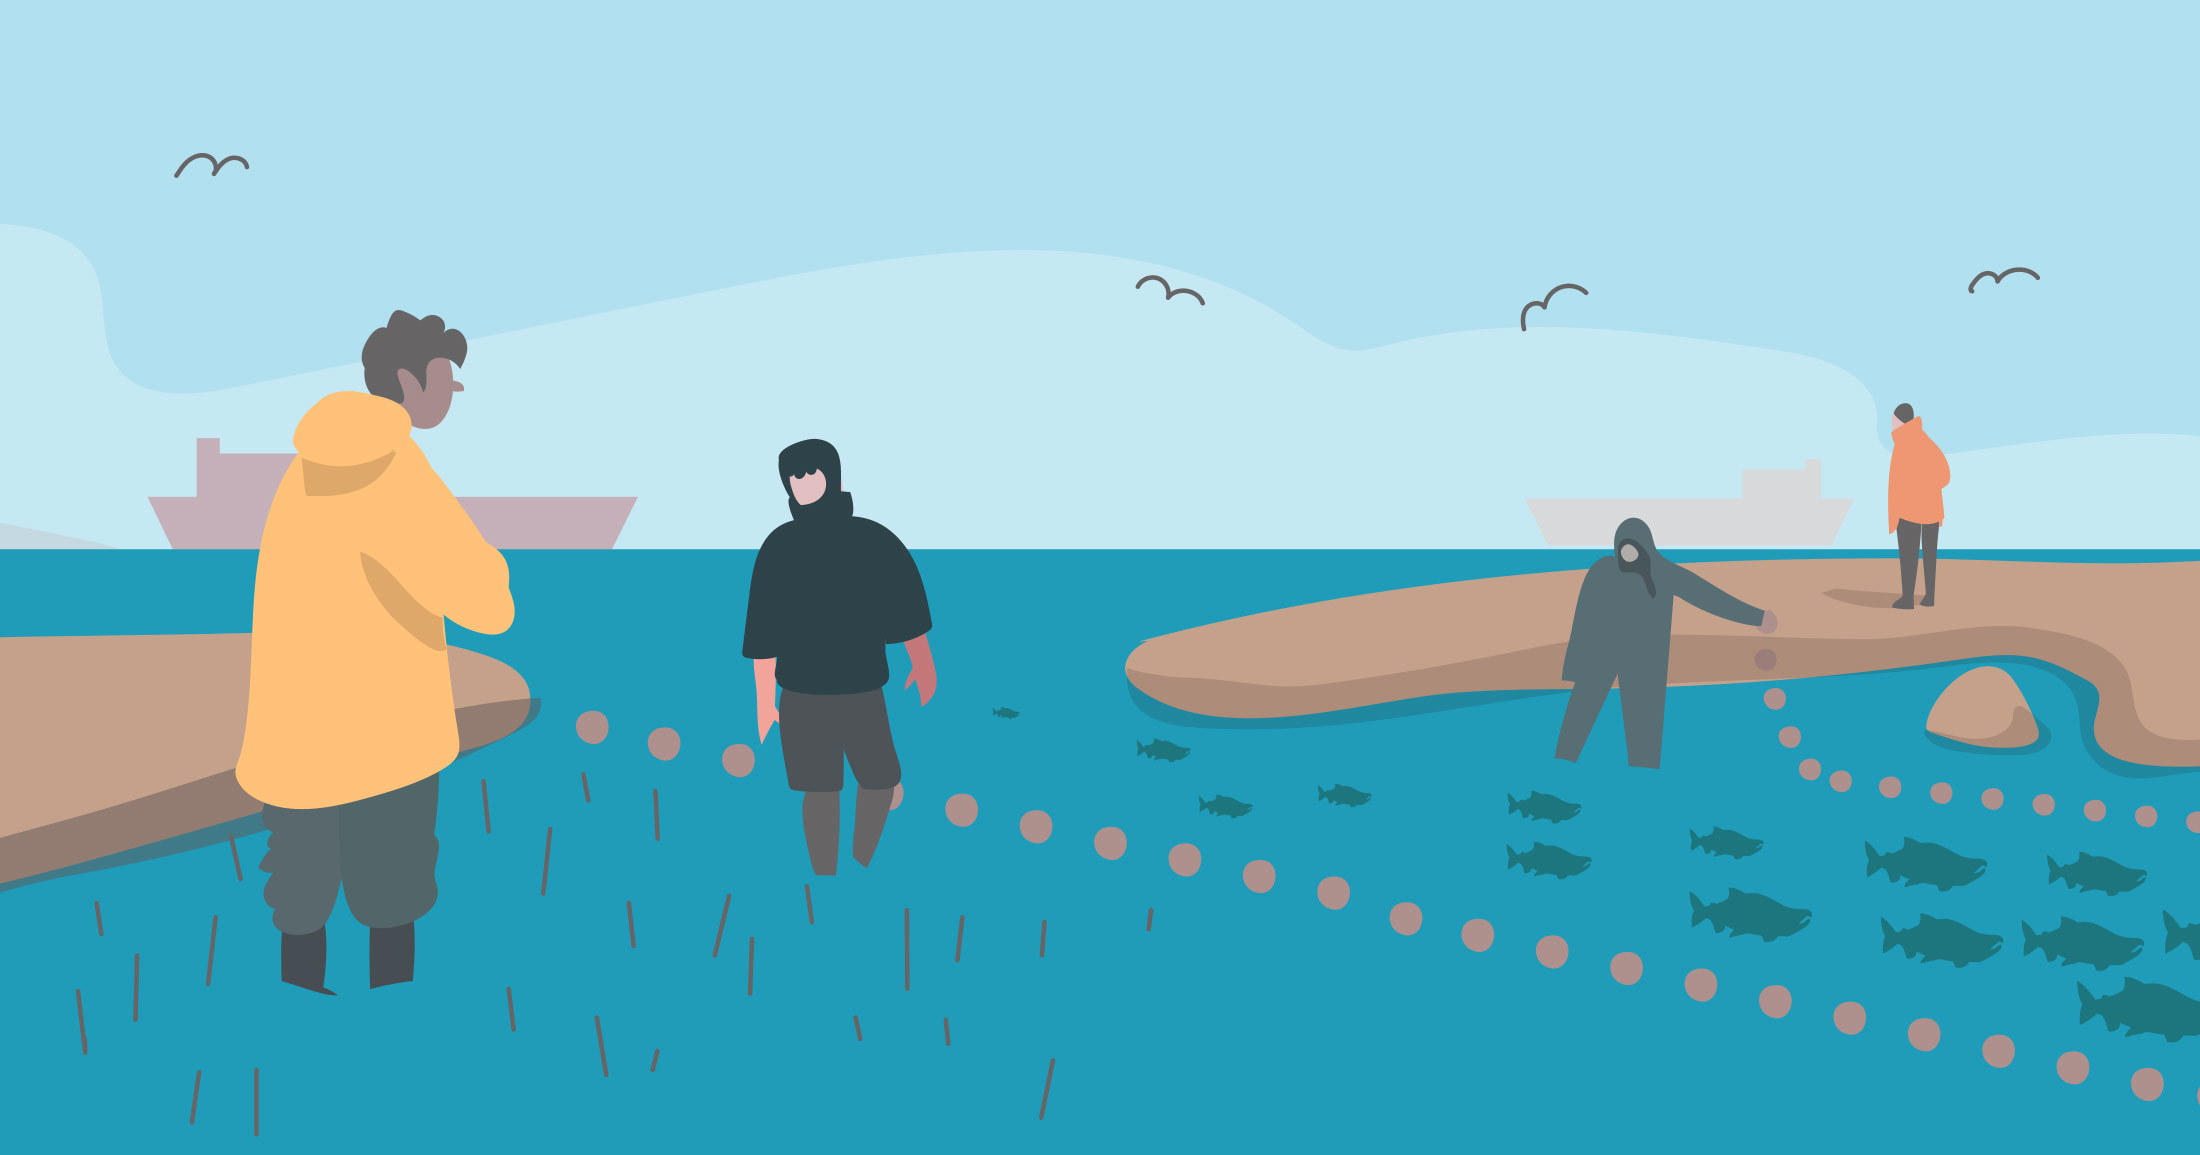 Illustration of scientists standing in the estuary watching the salmon swim through.